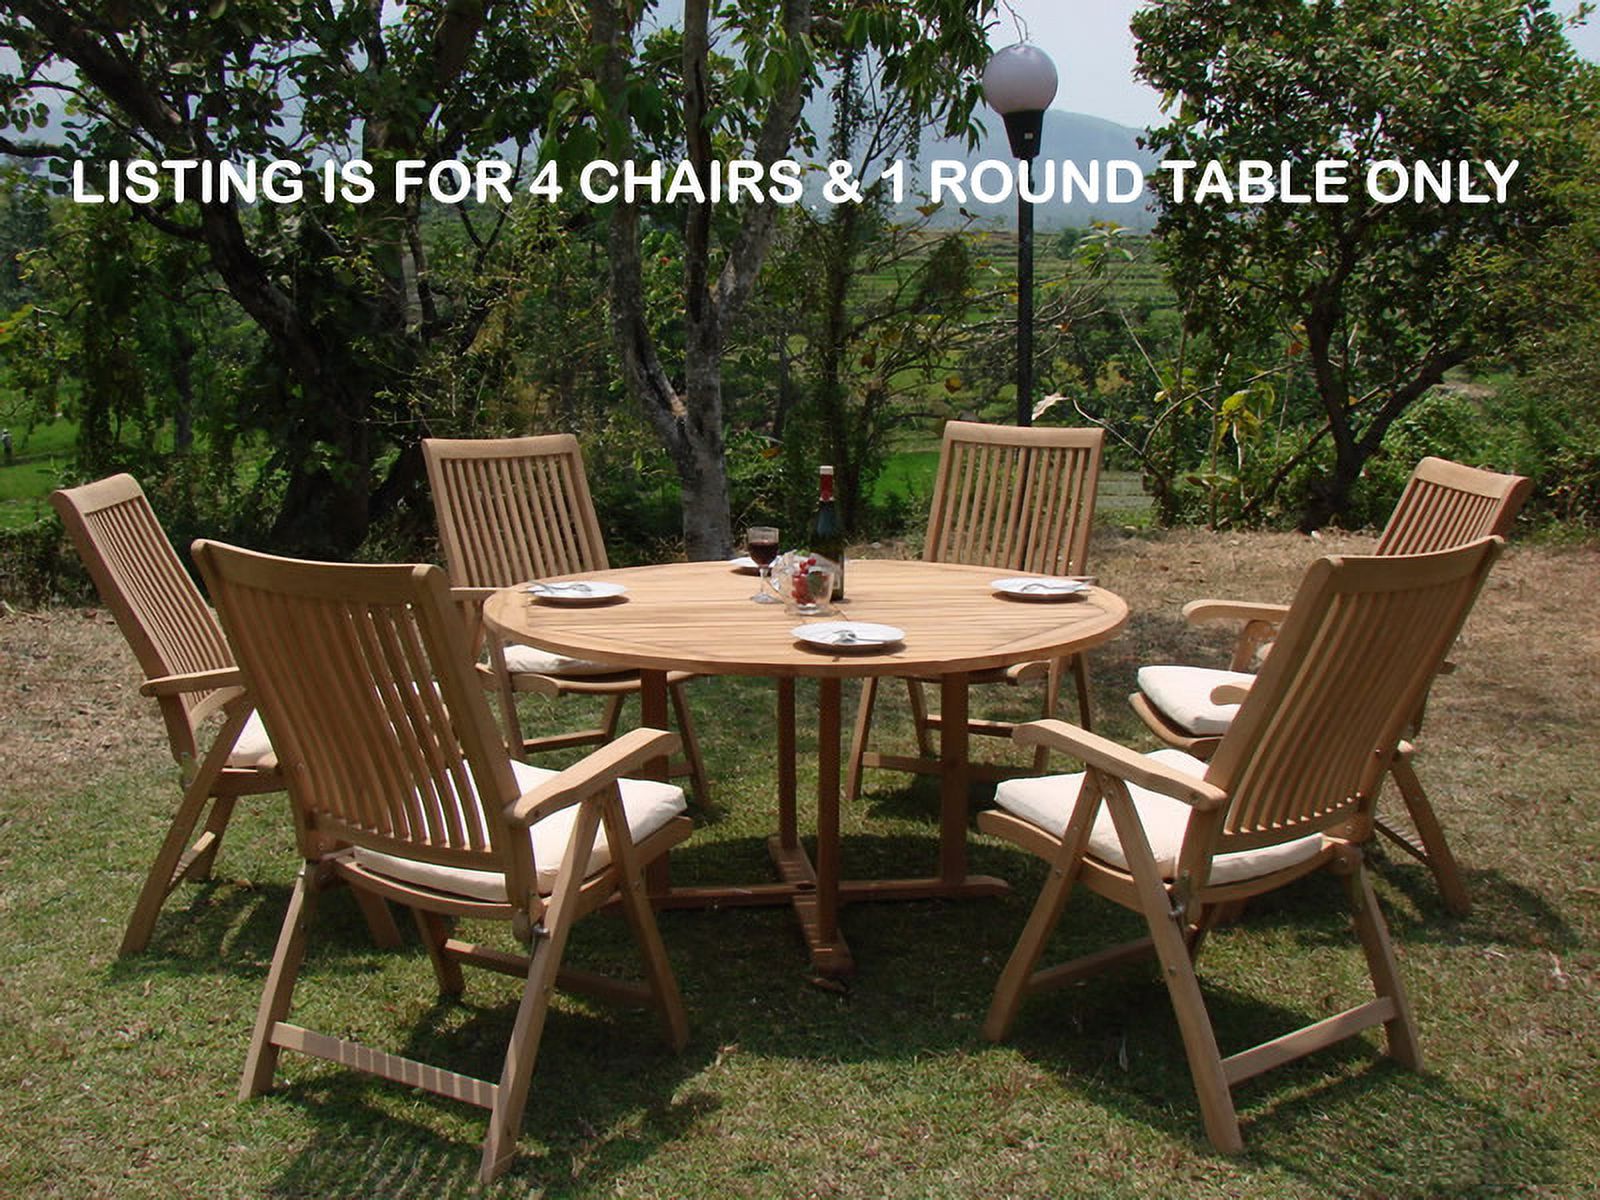 Teak Dining Set:4 Seater 5 Pc - 60" Round Table And 4 Marley Reclining Arm Chairs Outdoor Patio Grade-A Teak Wood WholesaleTeak #WMDSMR3 - image 4 of 4